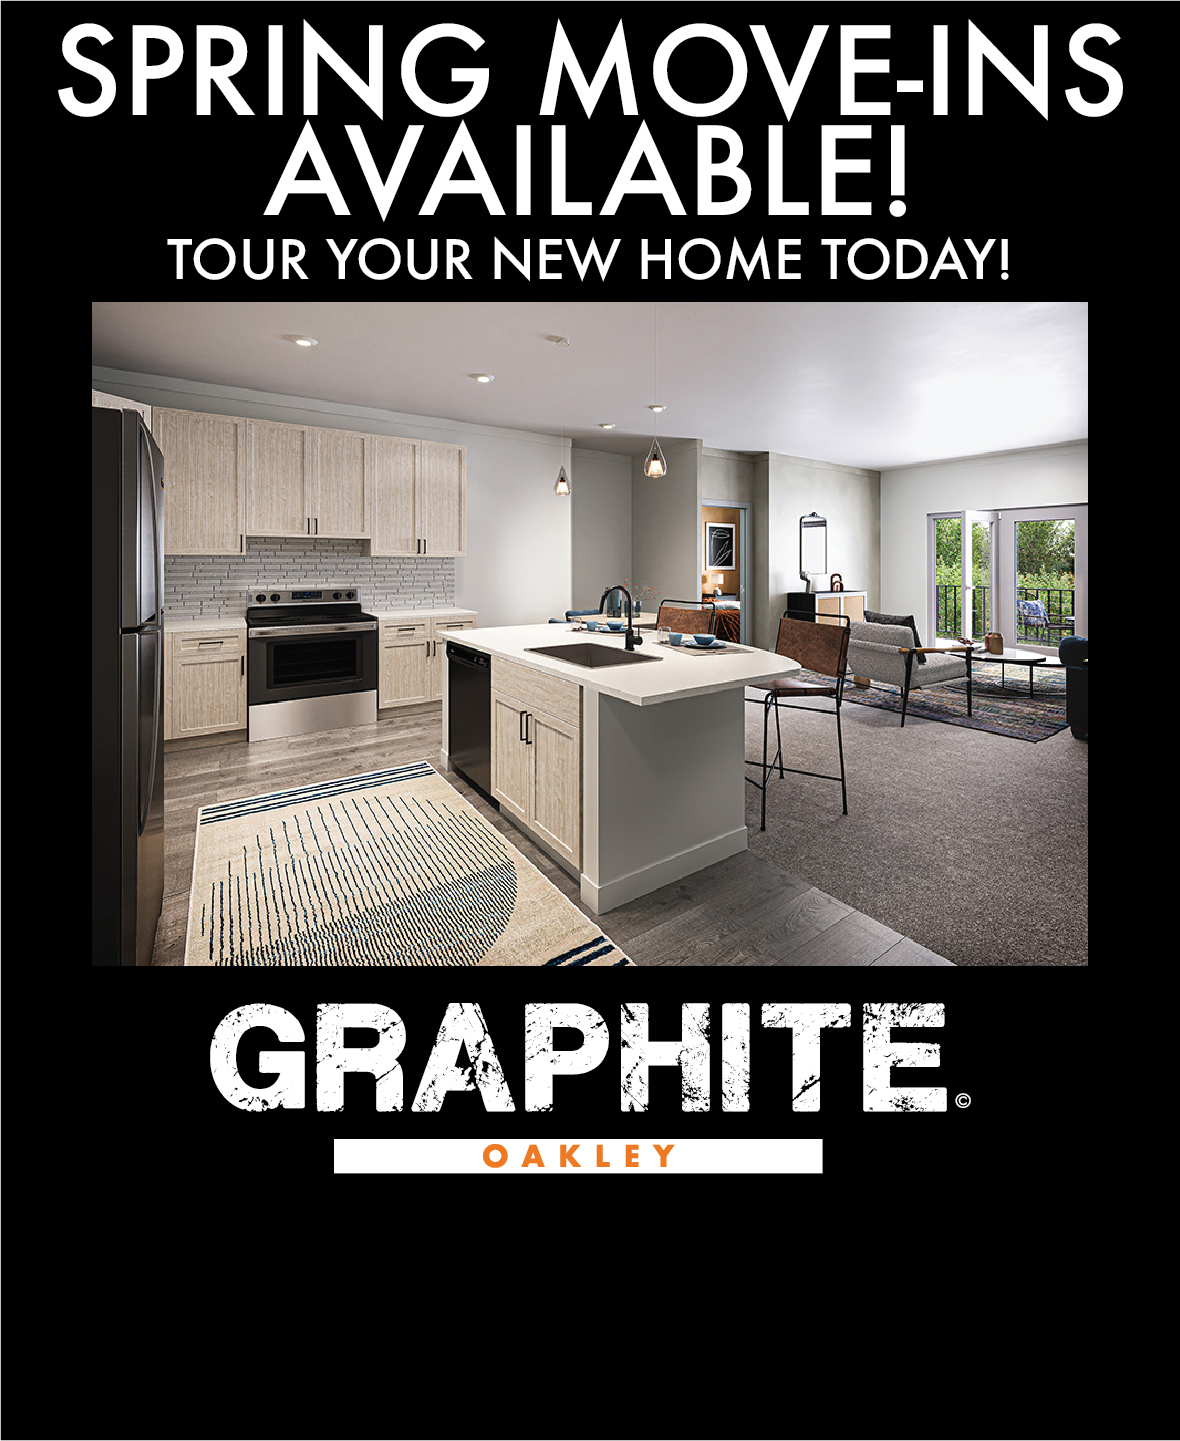 Spring Move-ins Available at Graphite Oakley